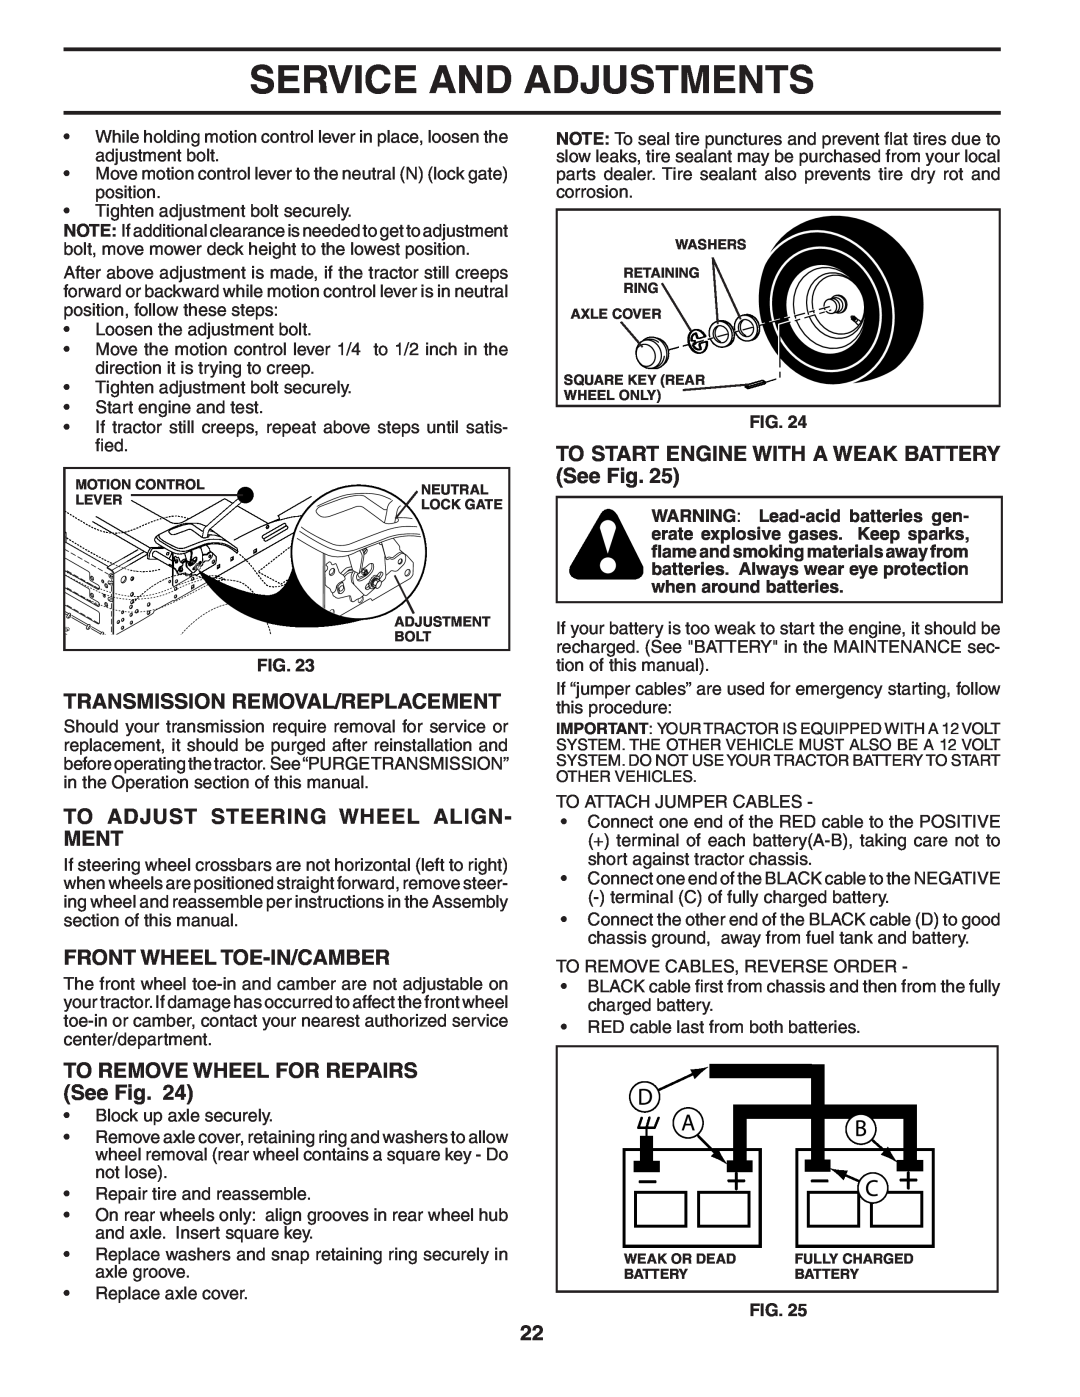 Poulan PB18H42LT manual Transmission Removal/Replacement, To Adjust Steering Wheel Align- Ment, Front Wheel Toe-In/Camber 